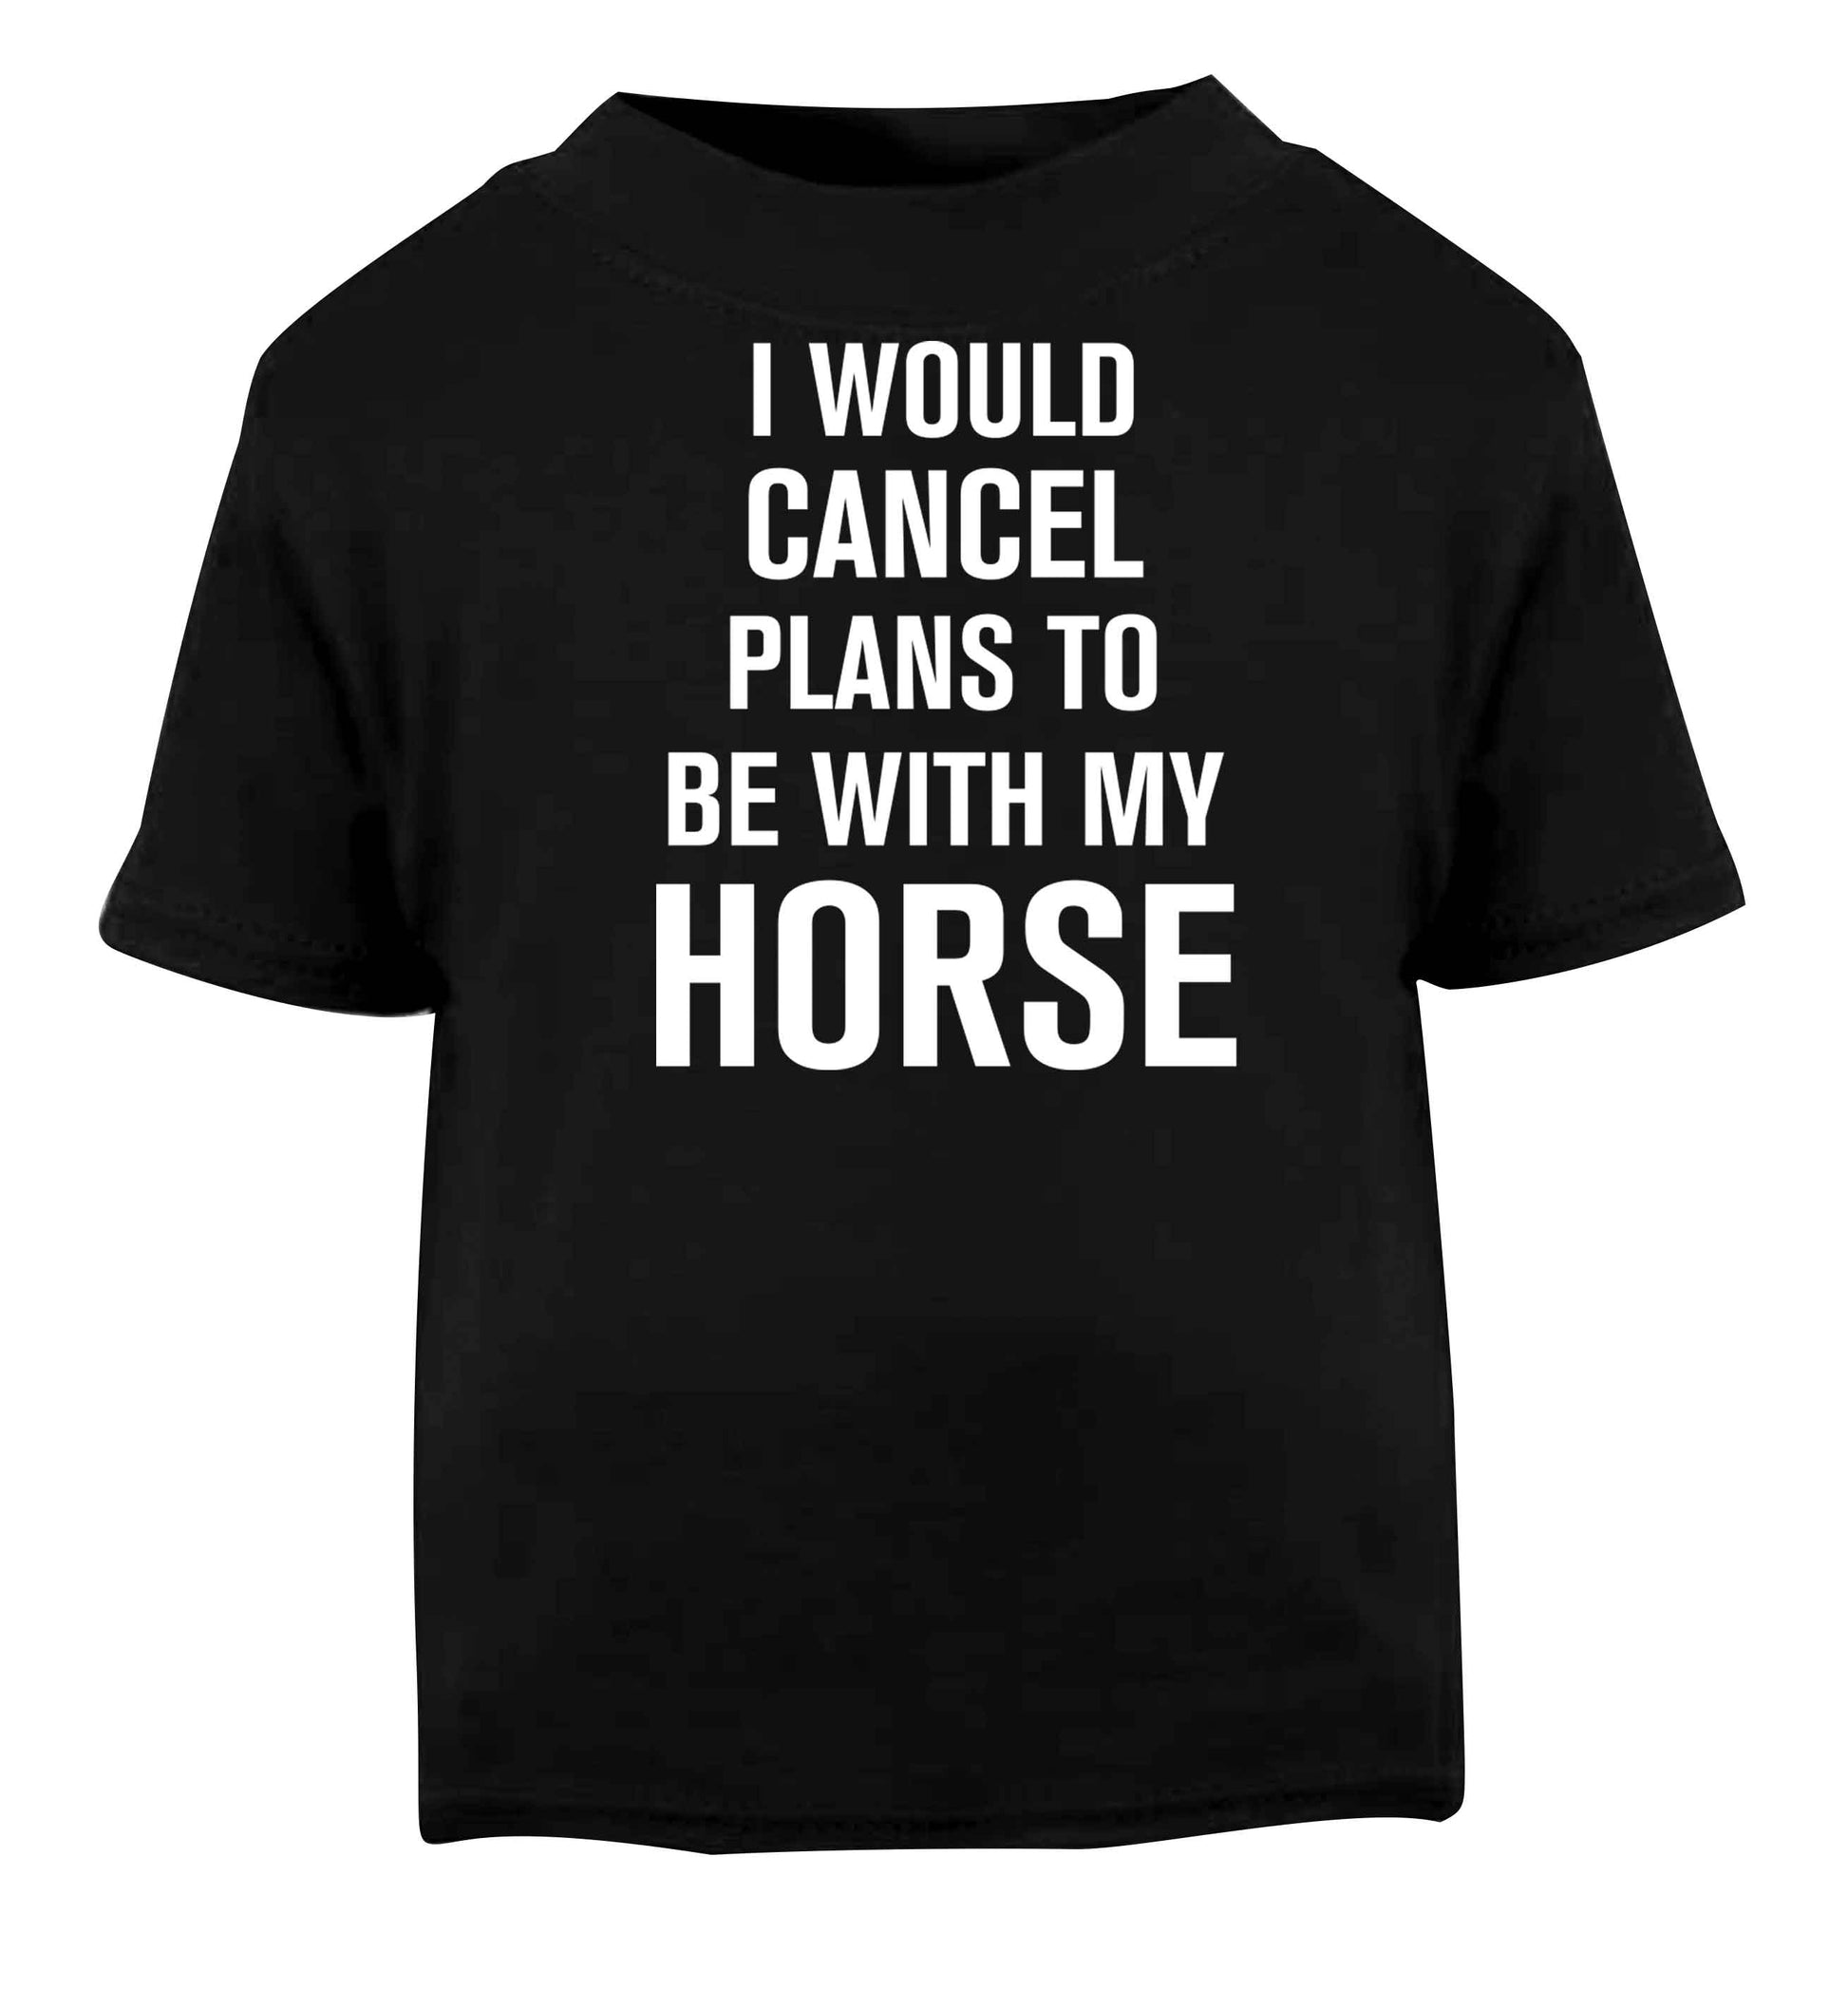 I will cancel plans to be with my horse Black baby toddler Tshirt 2 years